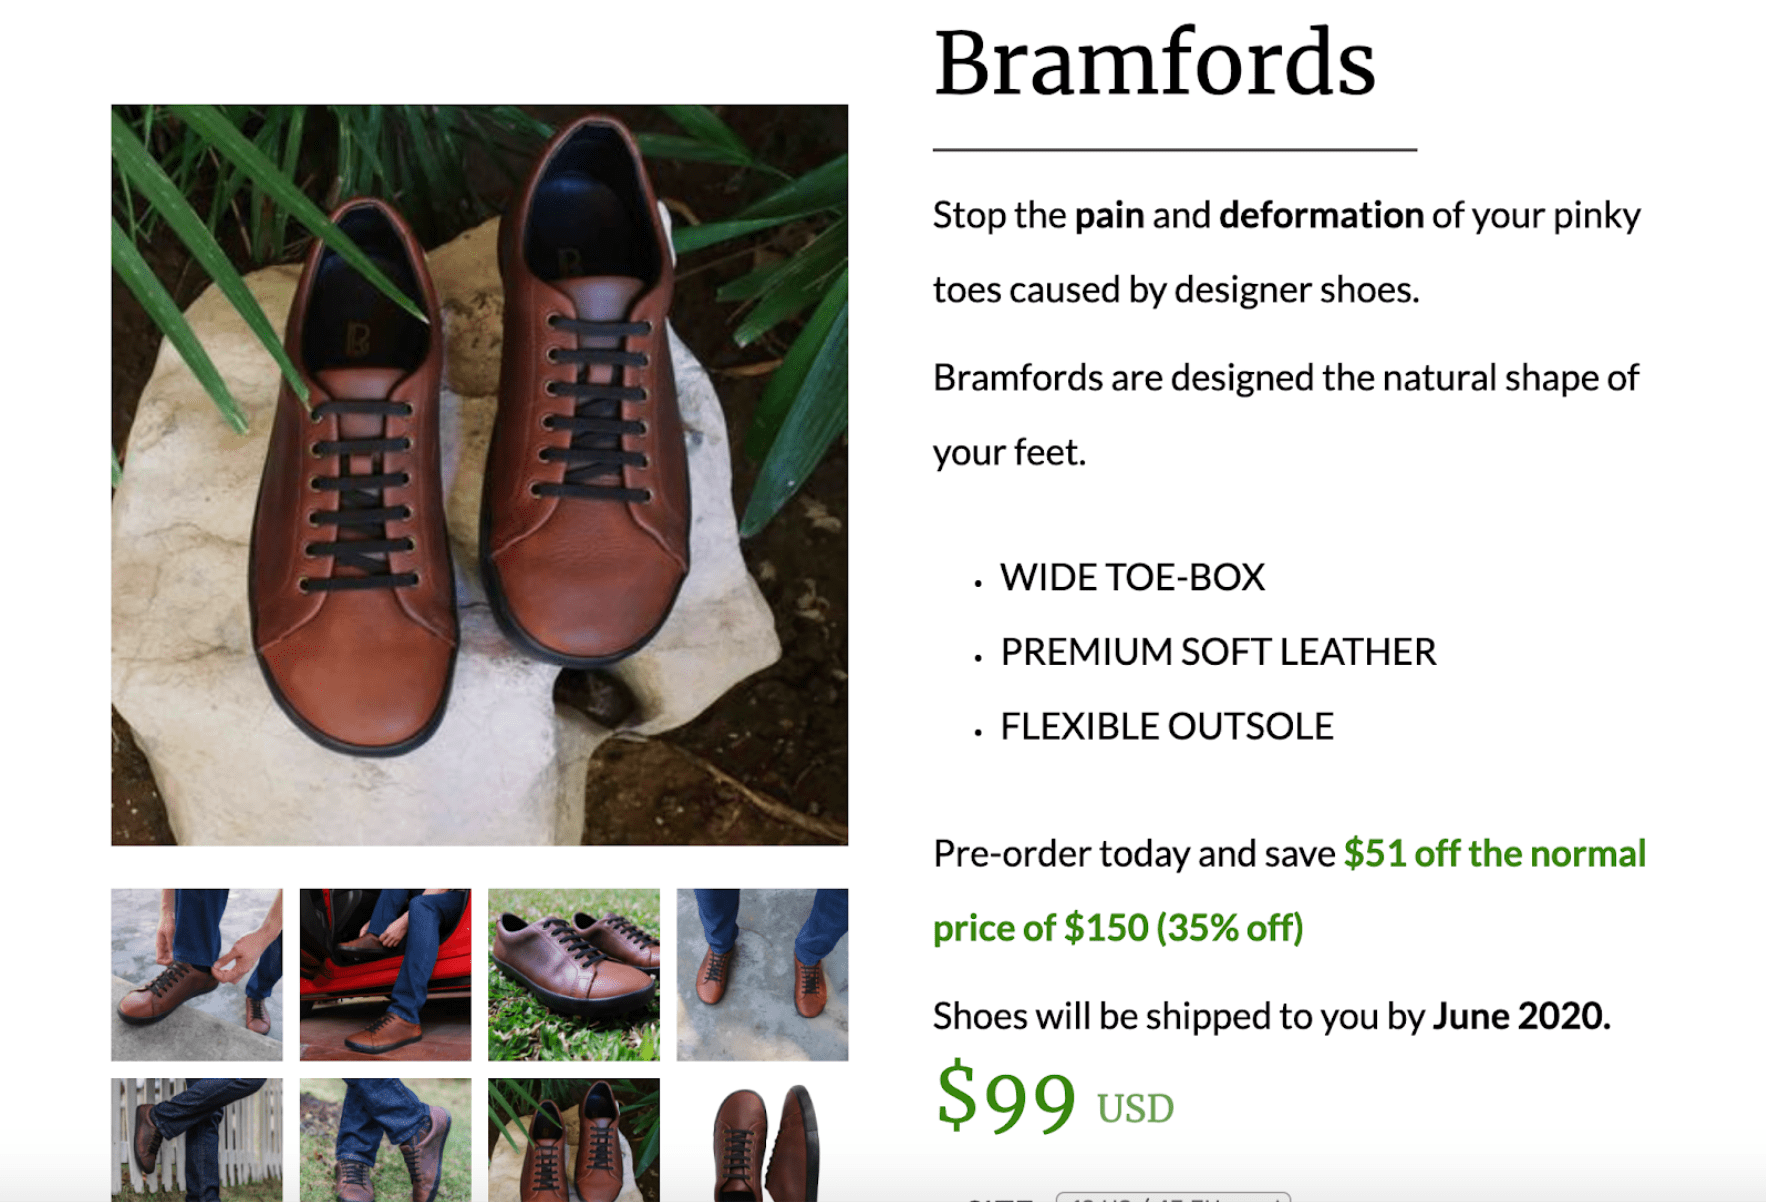 Birchbury visual attention to the discounted price of the shoe